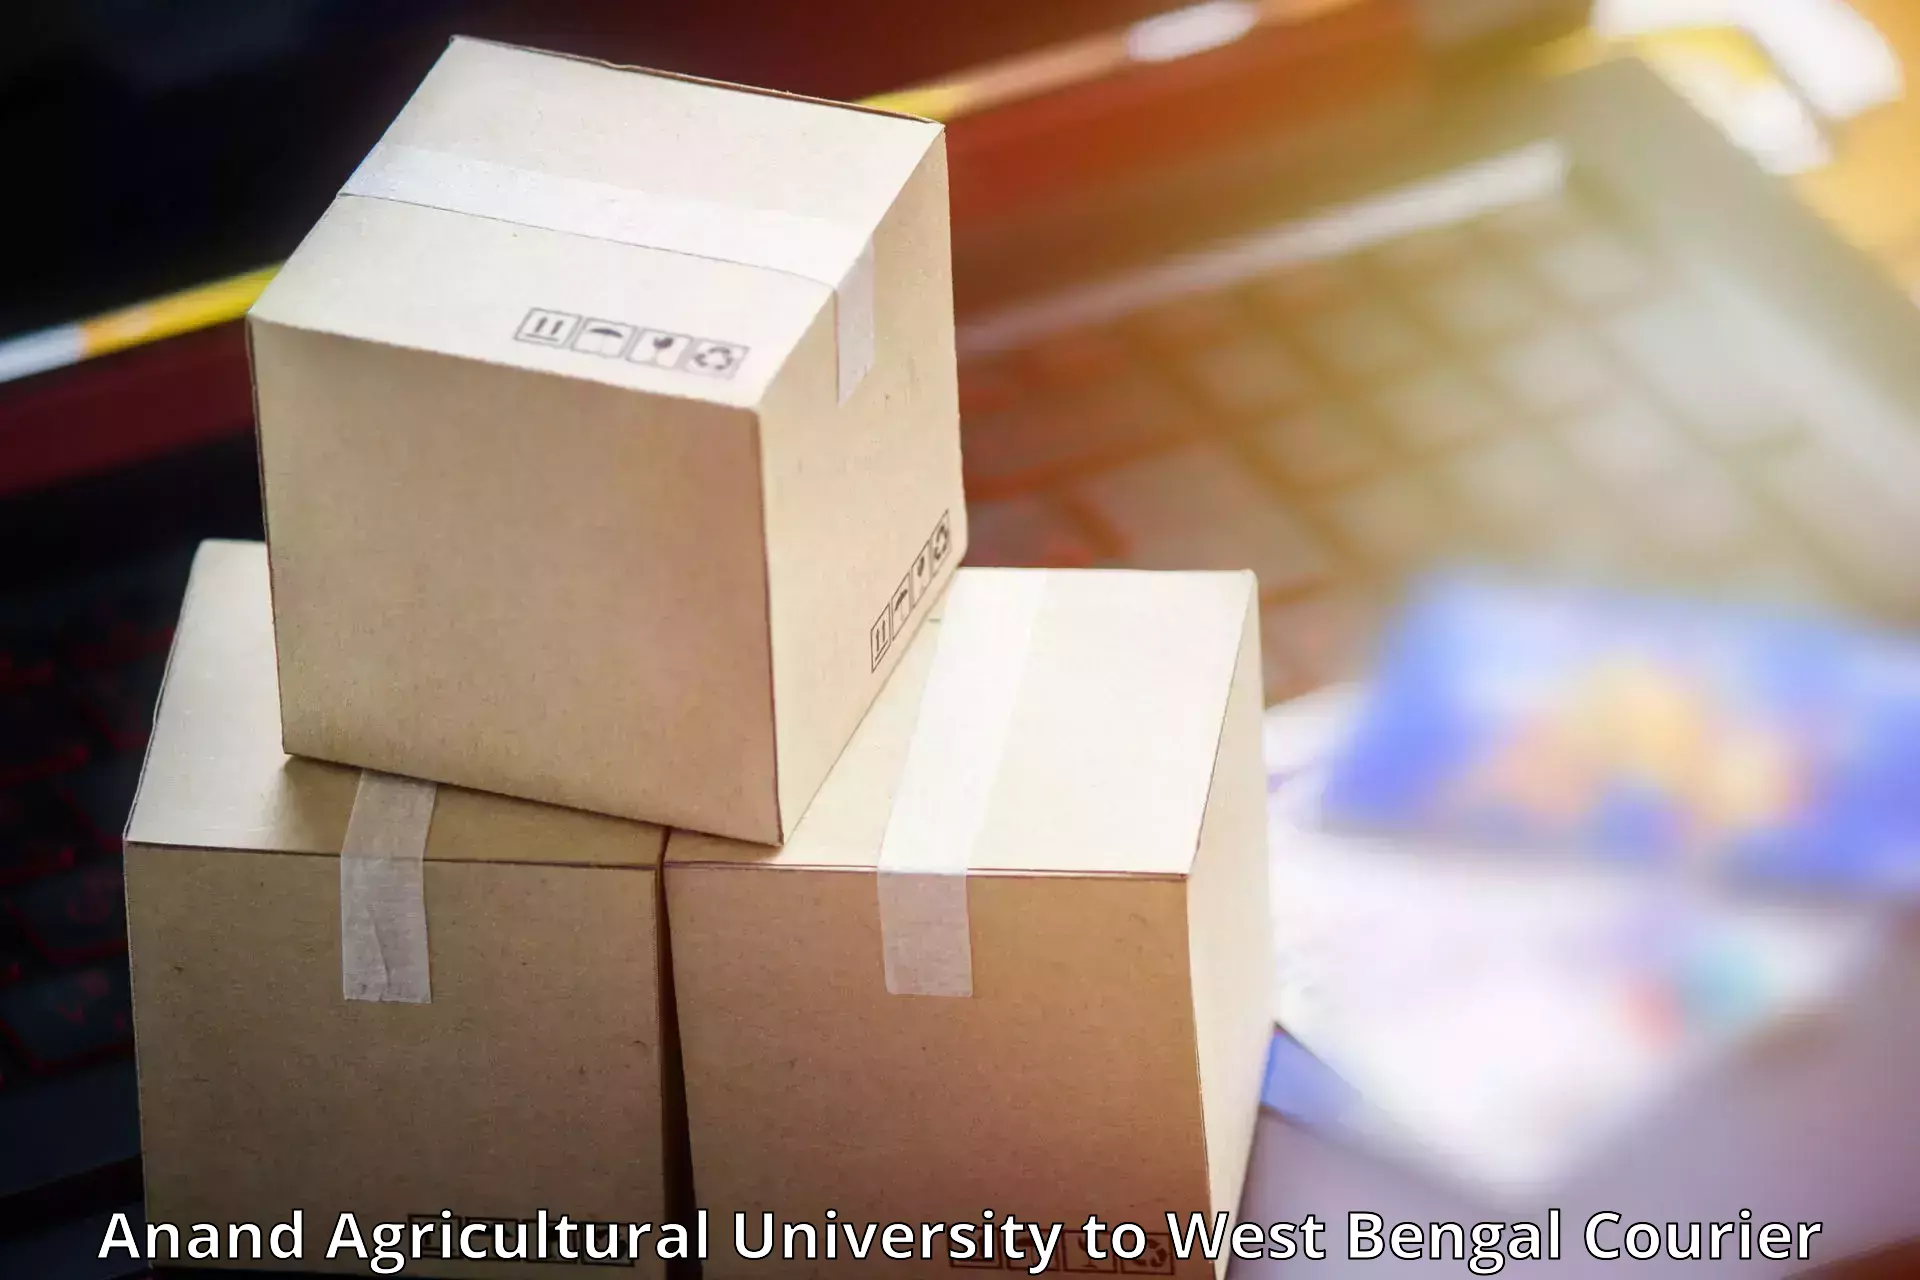 Heavy parcel delivery Anand Agricultural University to Barrackpore